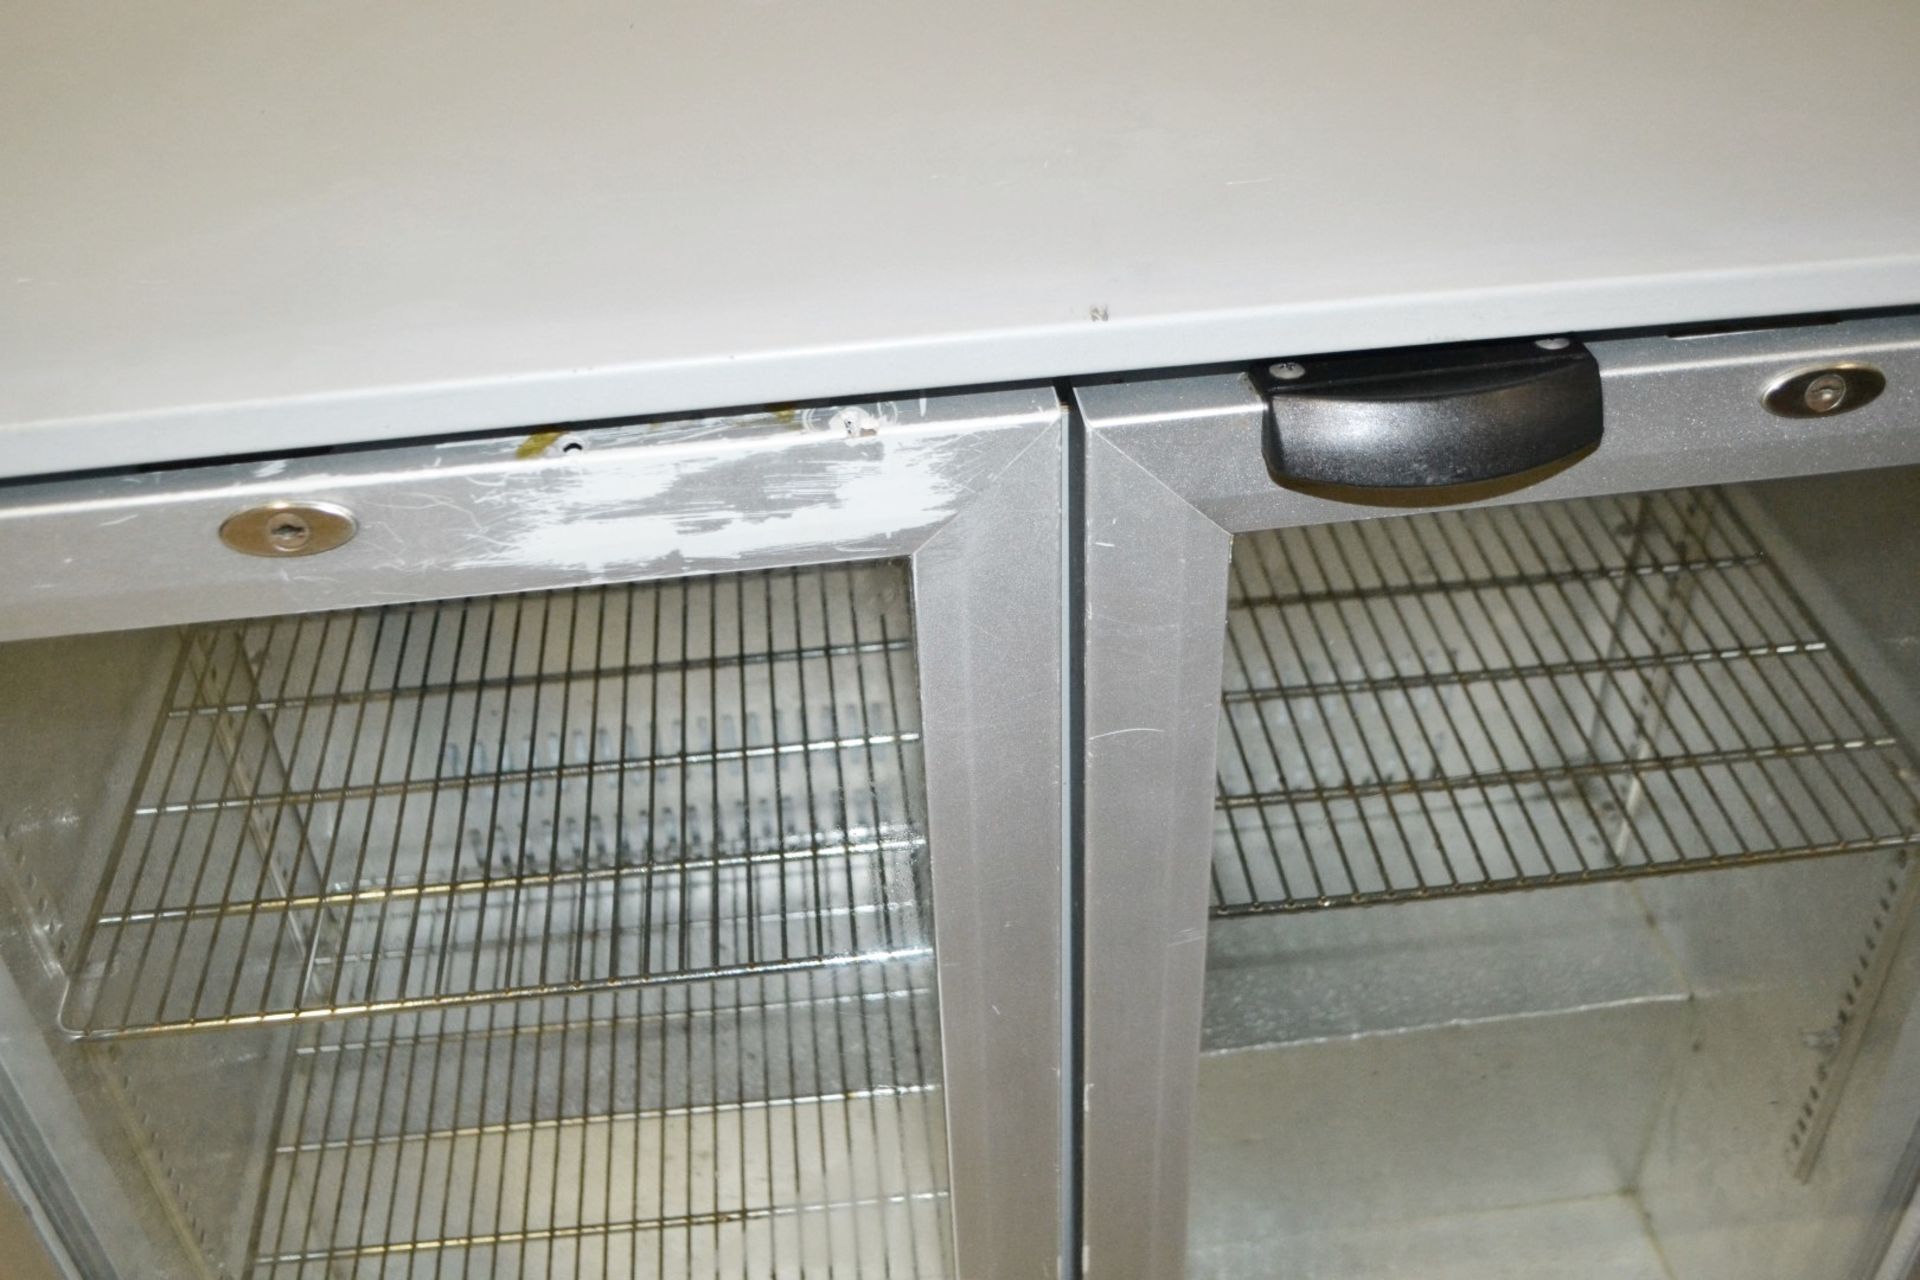 1 x Lec BC9007GlED Under-Counter 2-Door Commercial Bottle Cooler In Silver - Recently Removed From A - Image 3 of 4